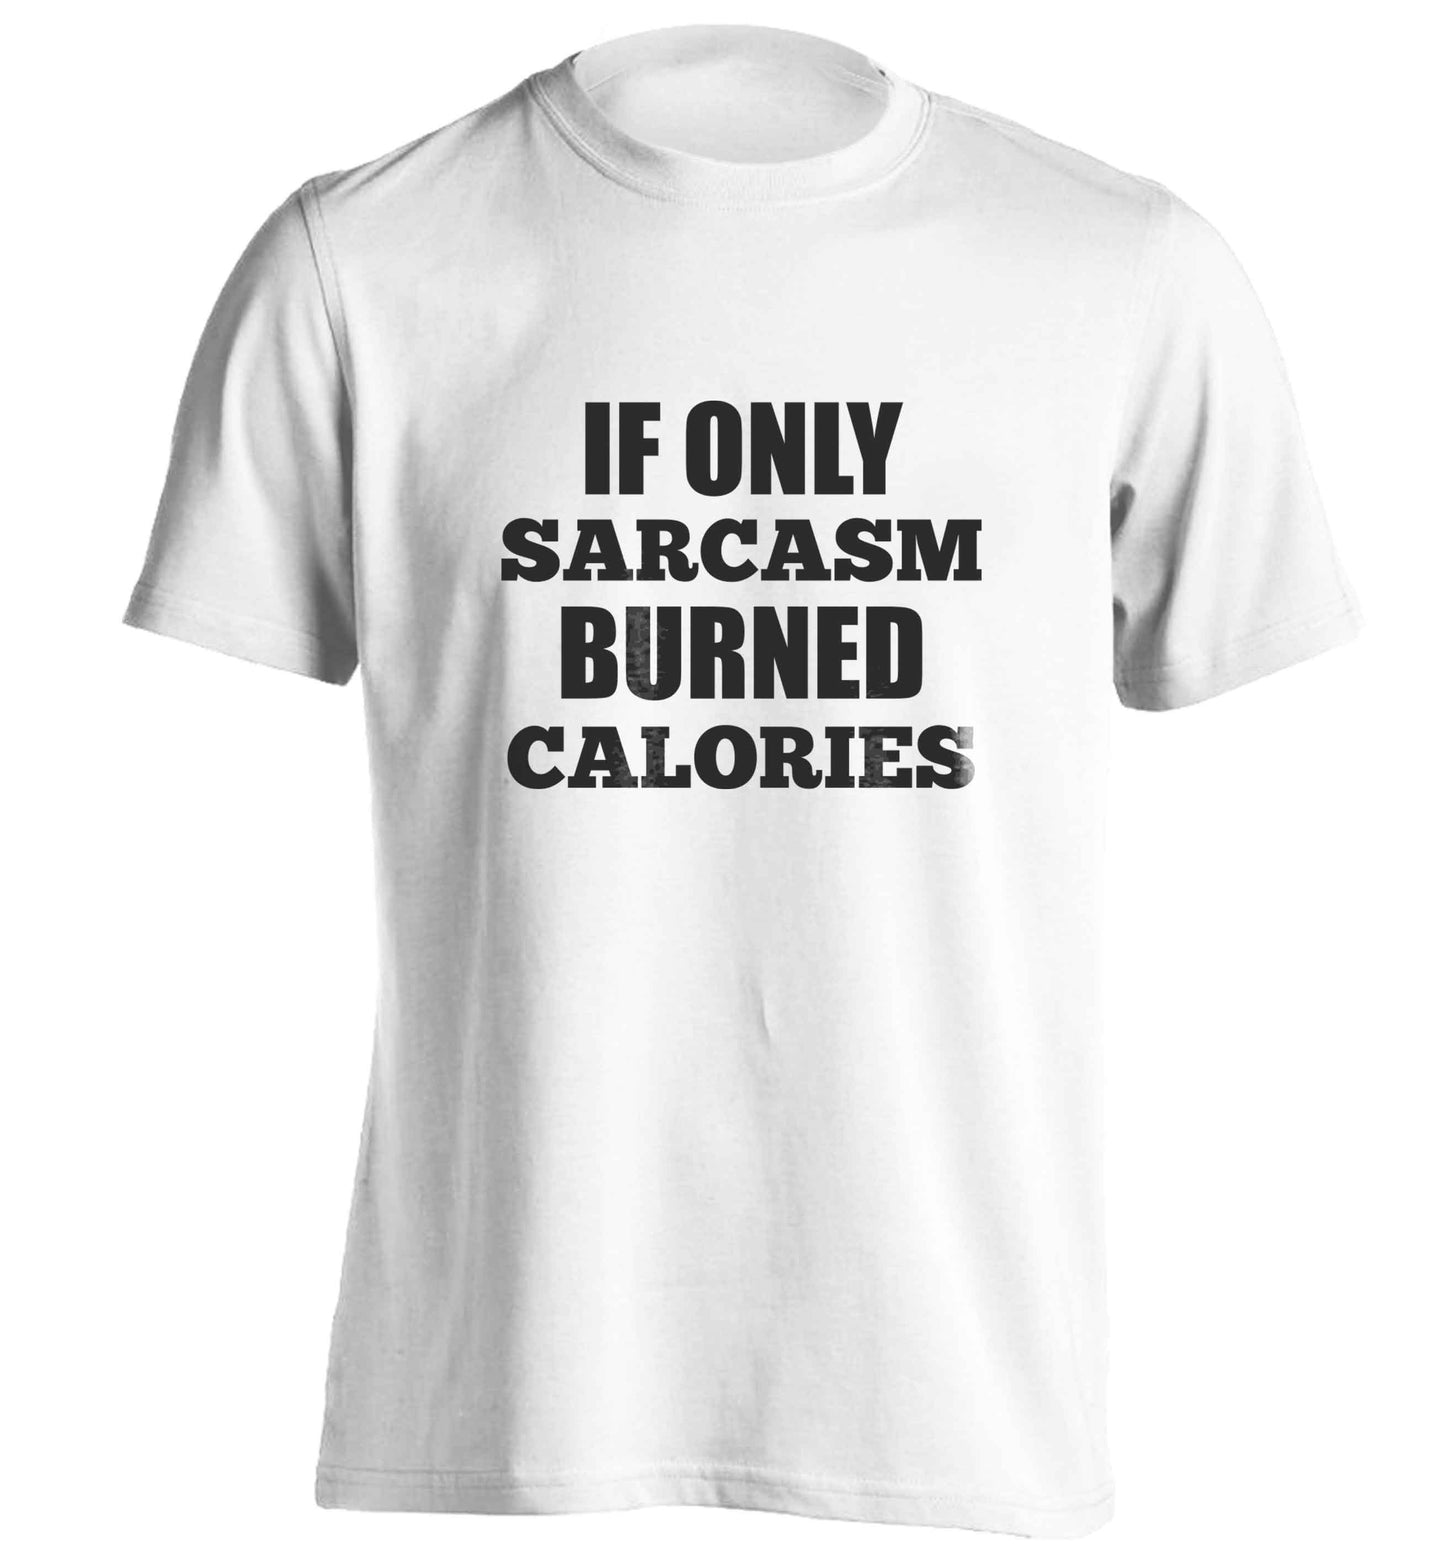 If only sarcasm burned calories adults unisex white Tshirt 2XL